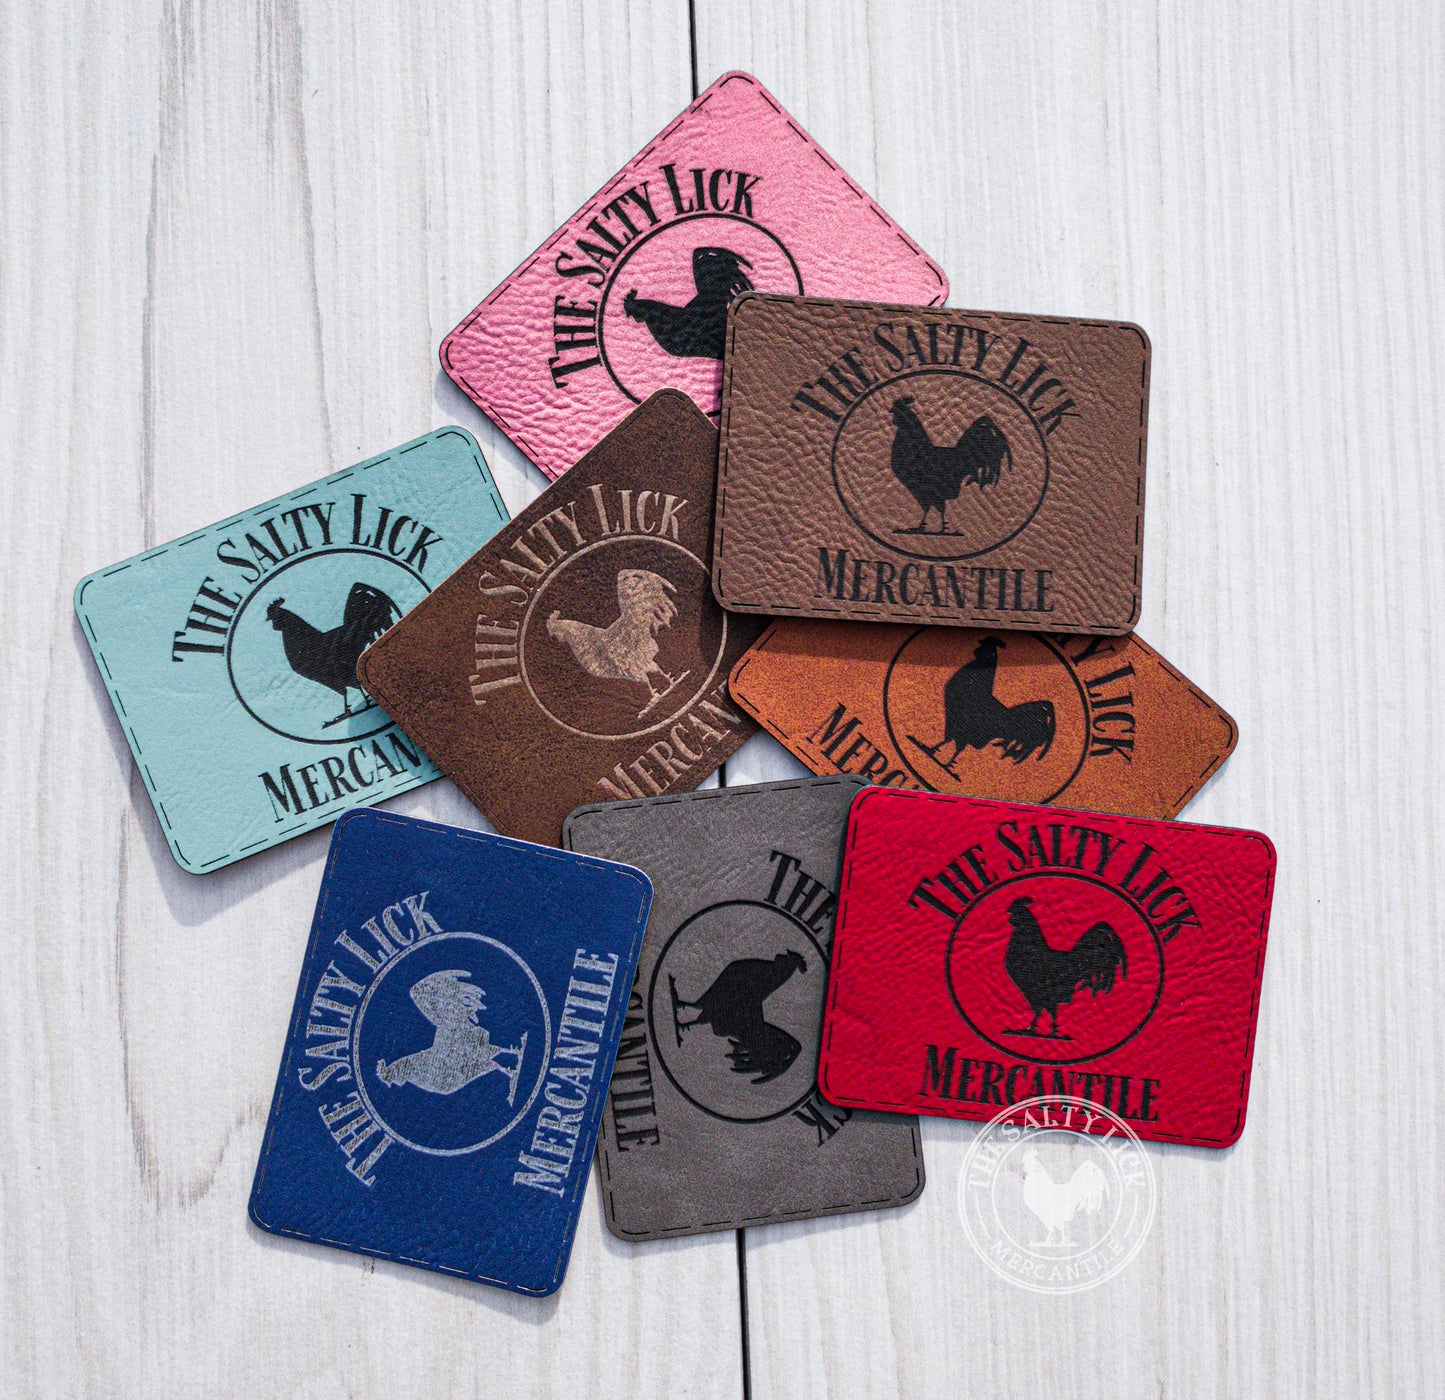 Custom Cut/Engraved Leatherette Patches with ADHESIVE - The Salty Lick Mercantile